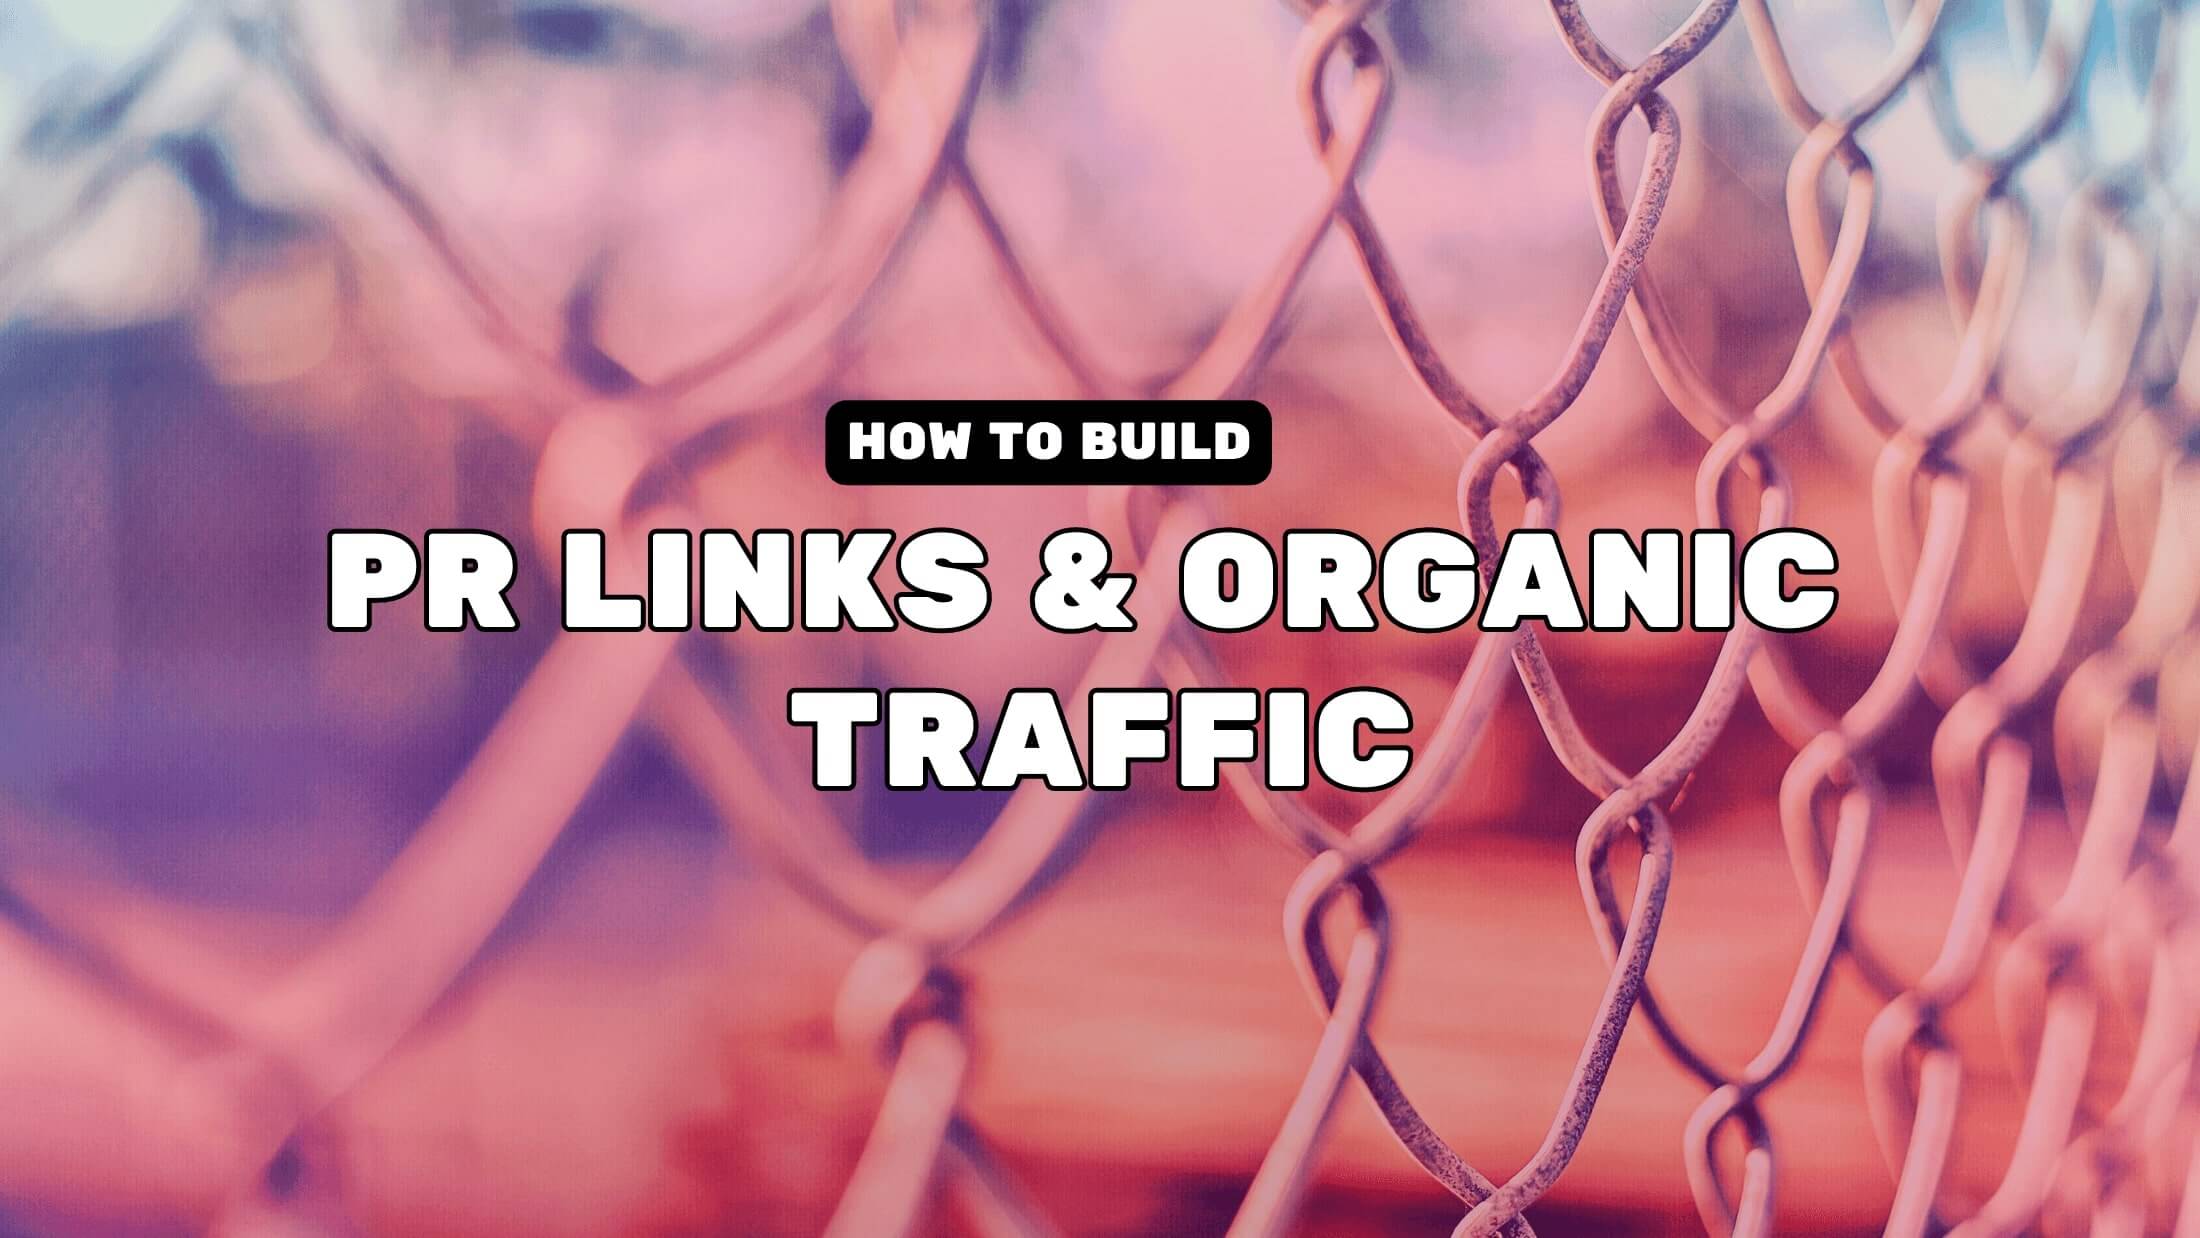 PR Links and Earned Media CAN Lead To Organic Traffic. Here’s How…